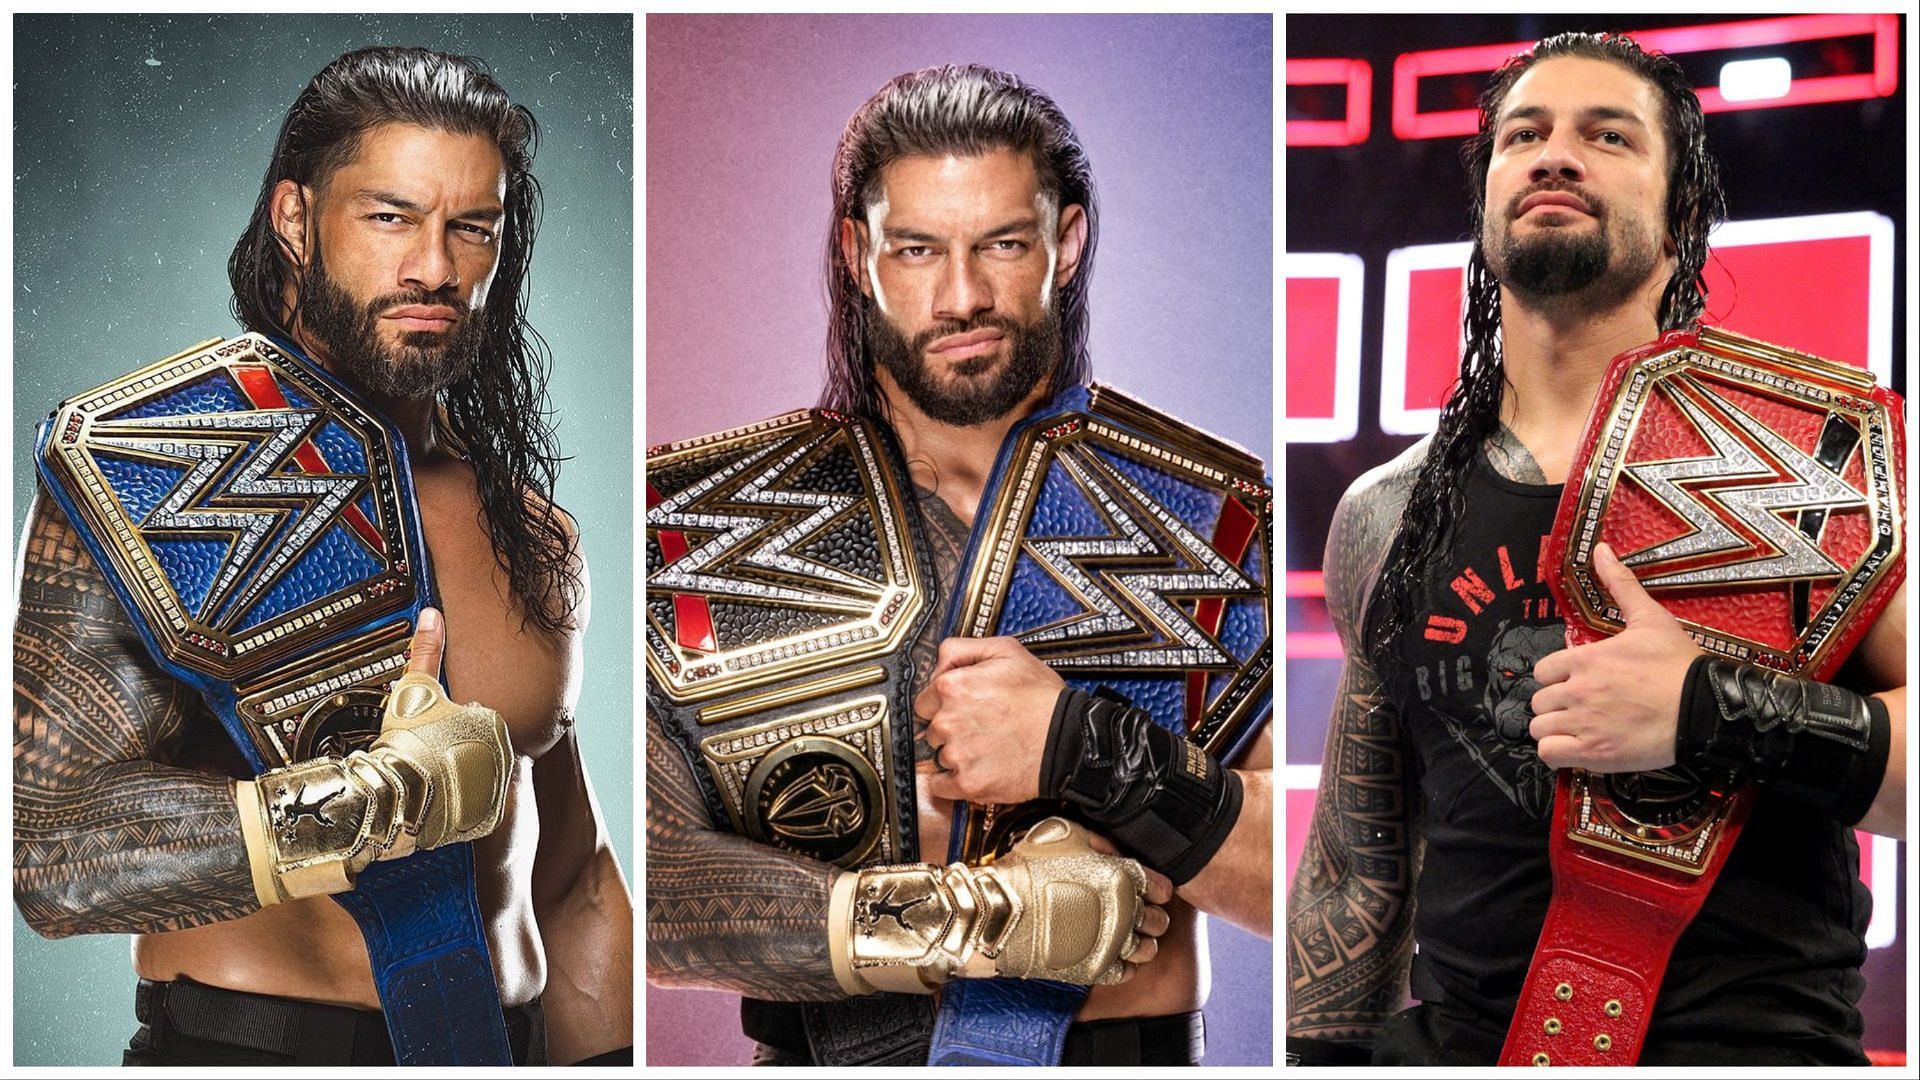 Roman Reigns is a two-time WWE Universal Champion